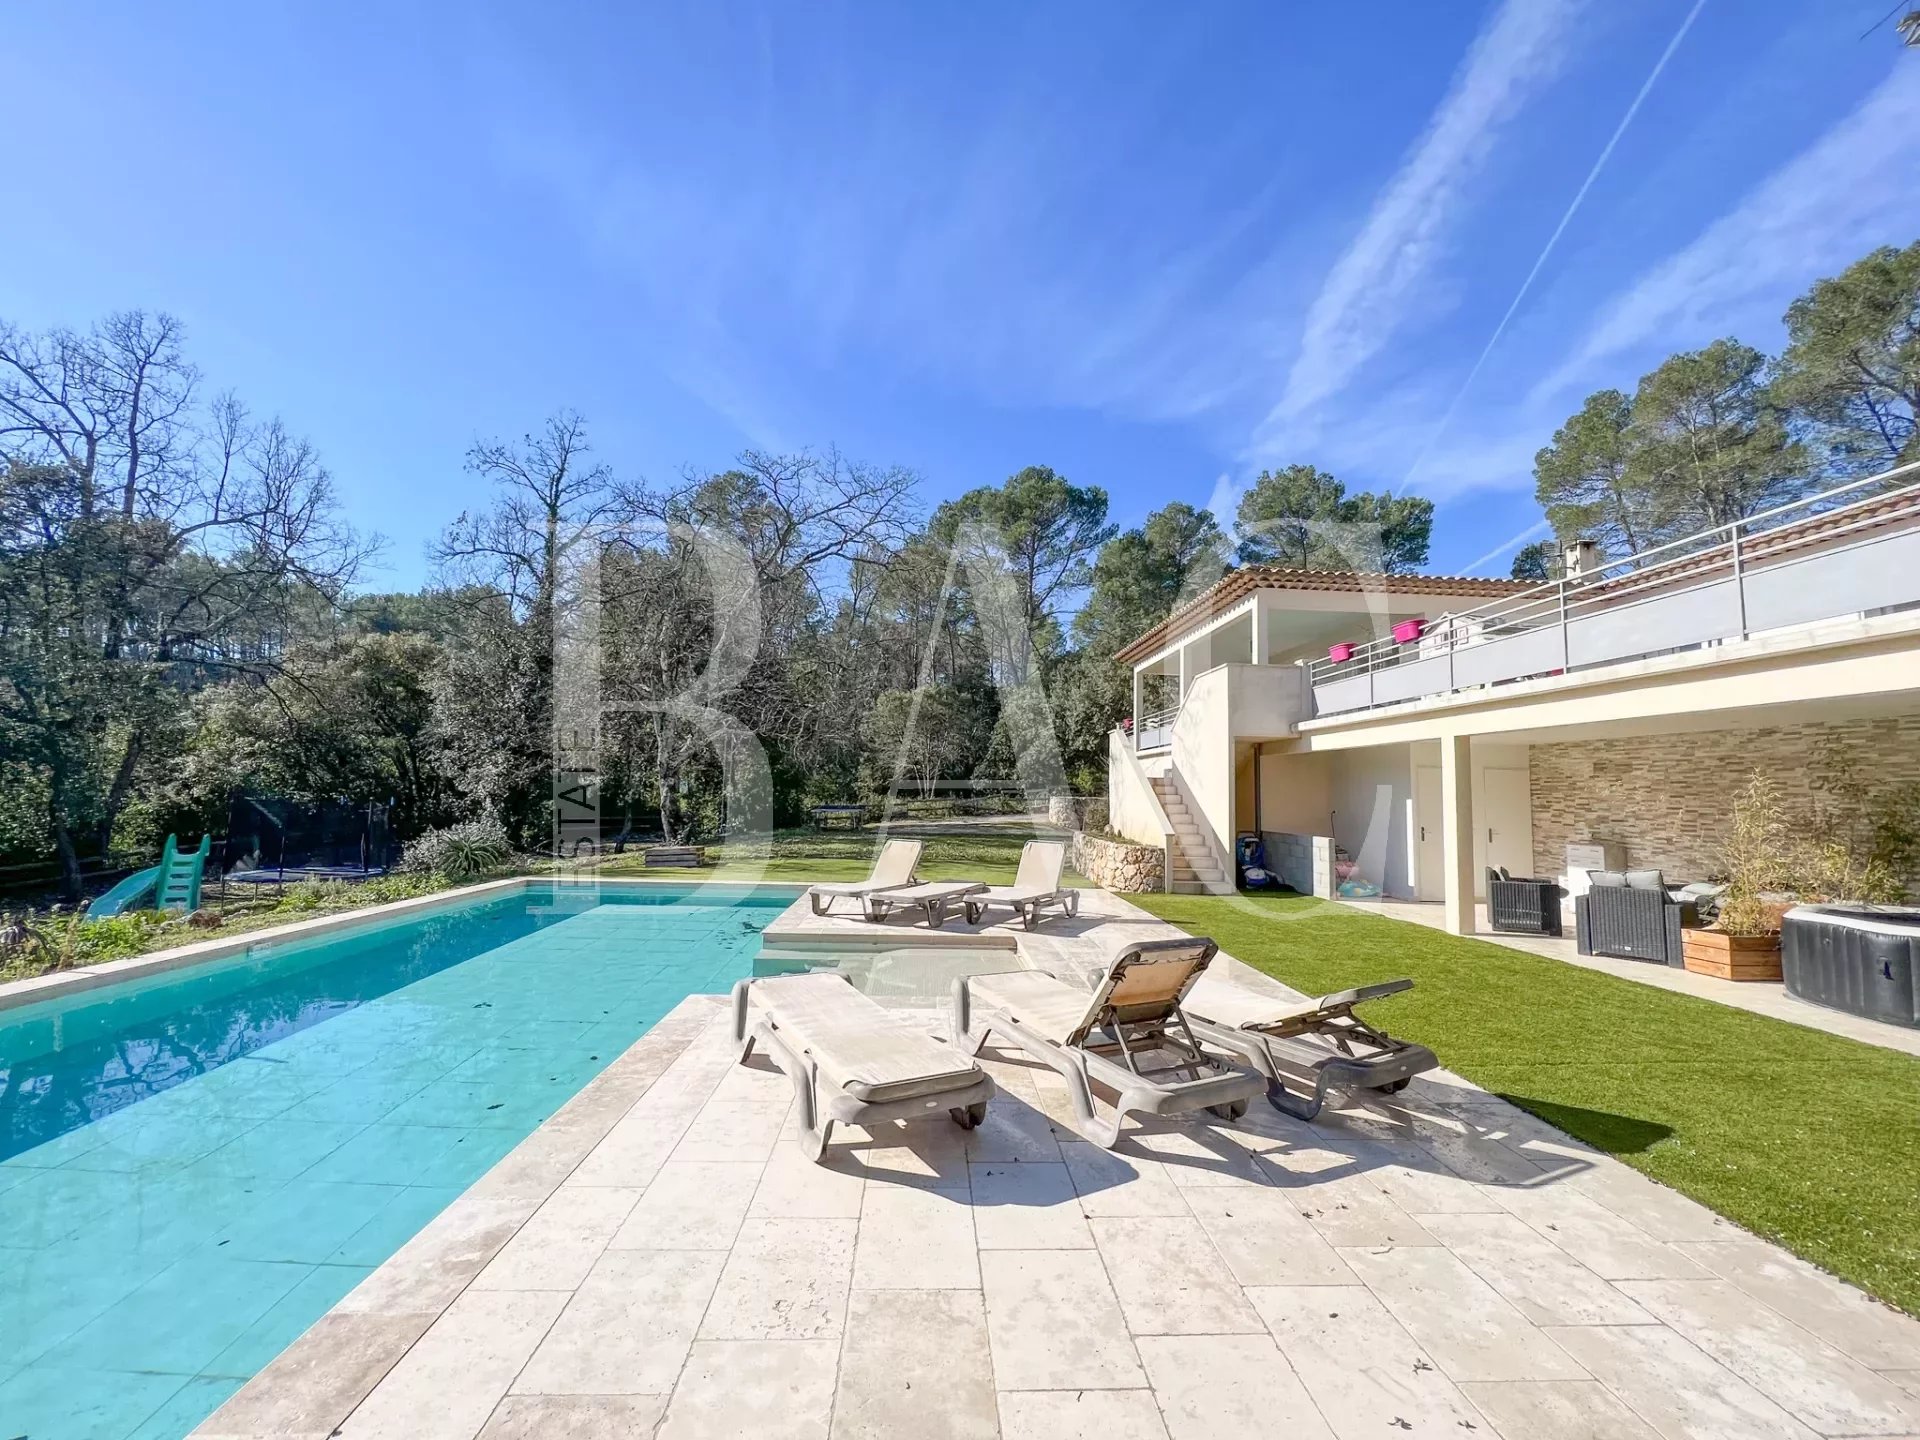 Lorgues - beautiful villa located 5 minutes from the center of the village, in the heart of a wooded environment.